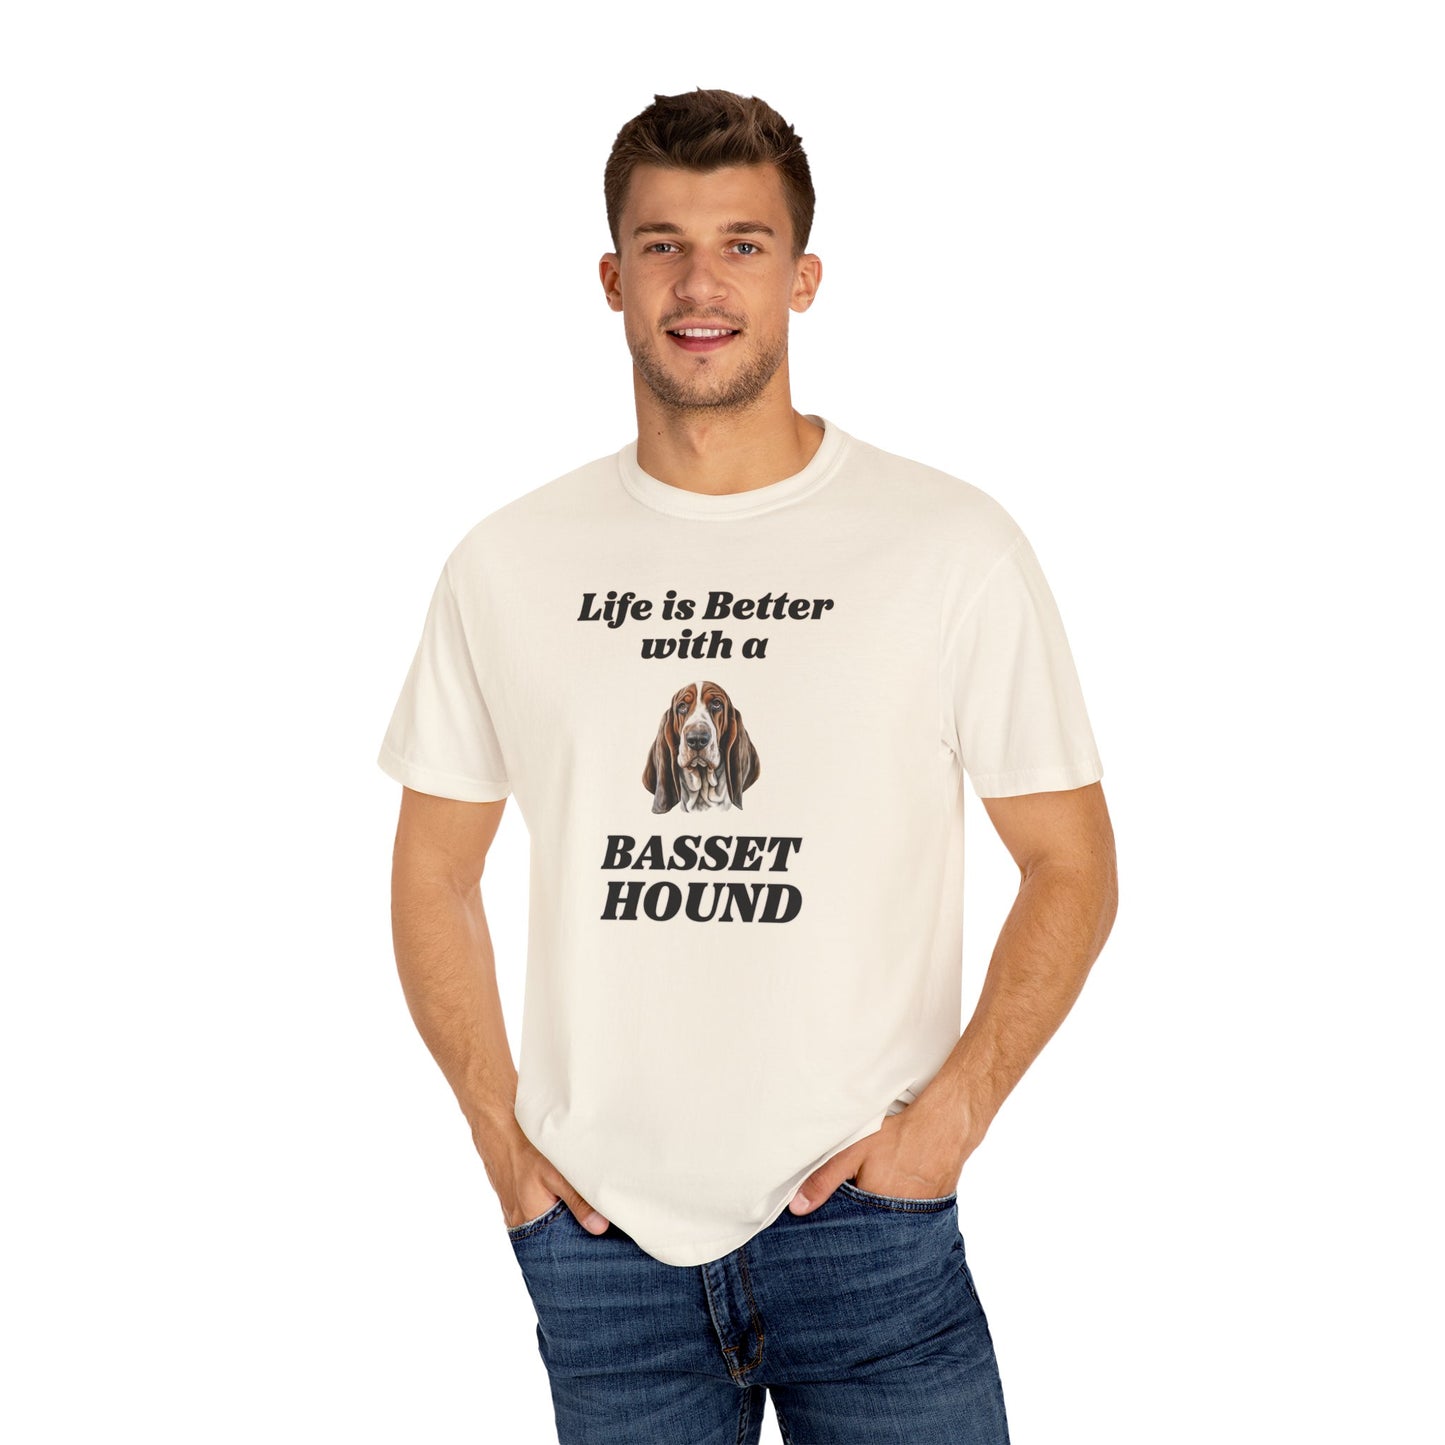 Life is Better with a Basset Hound Tshirt